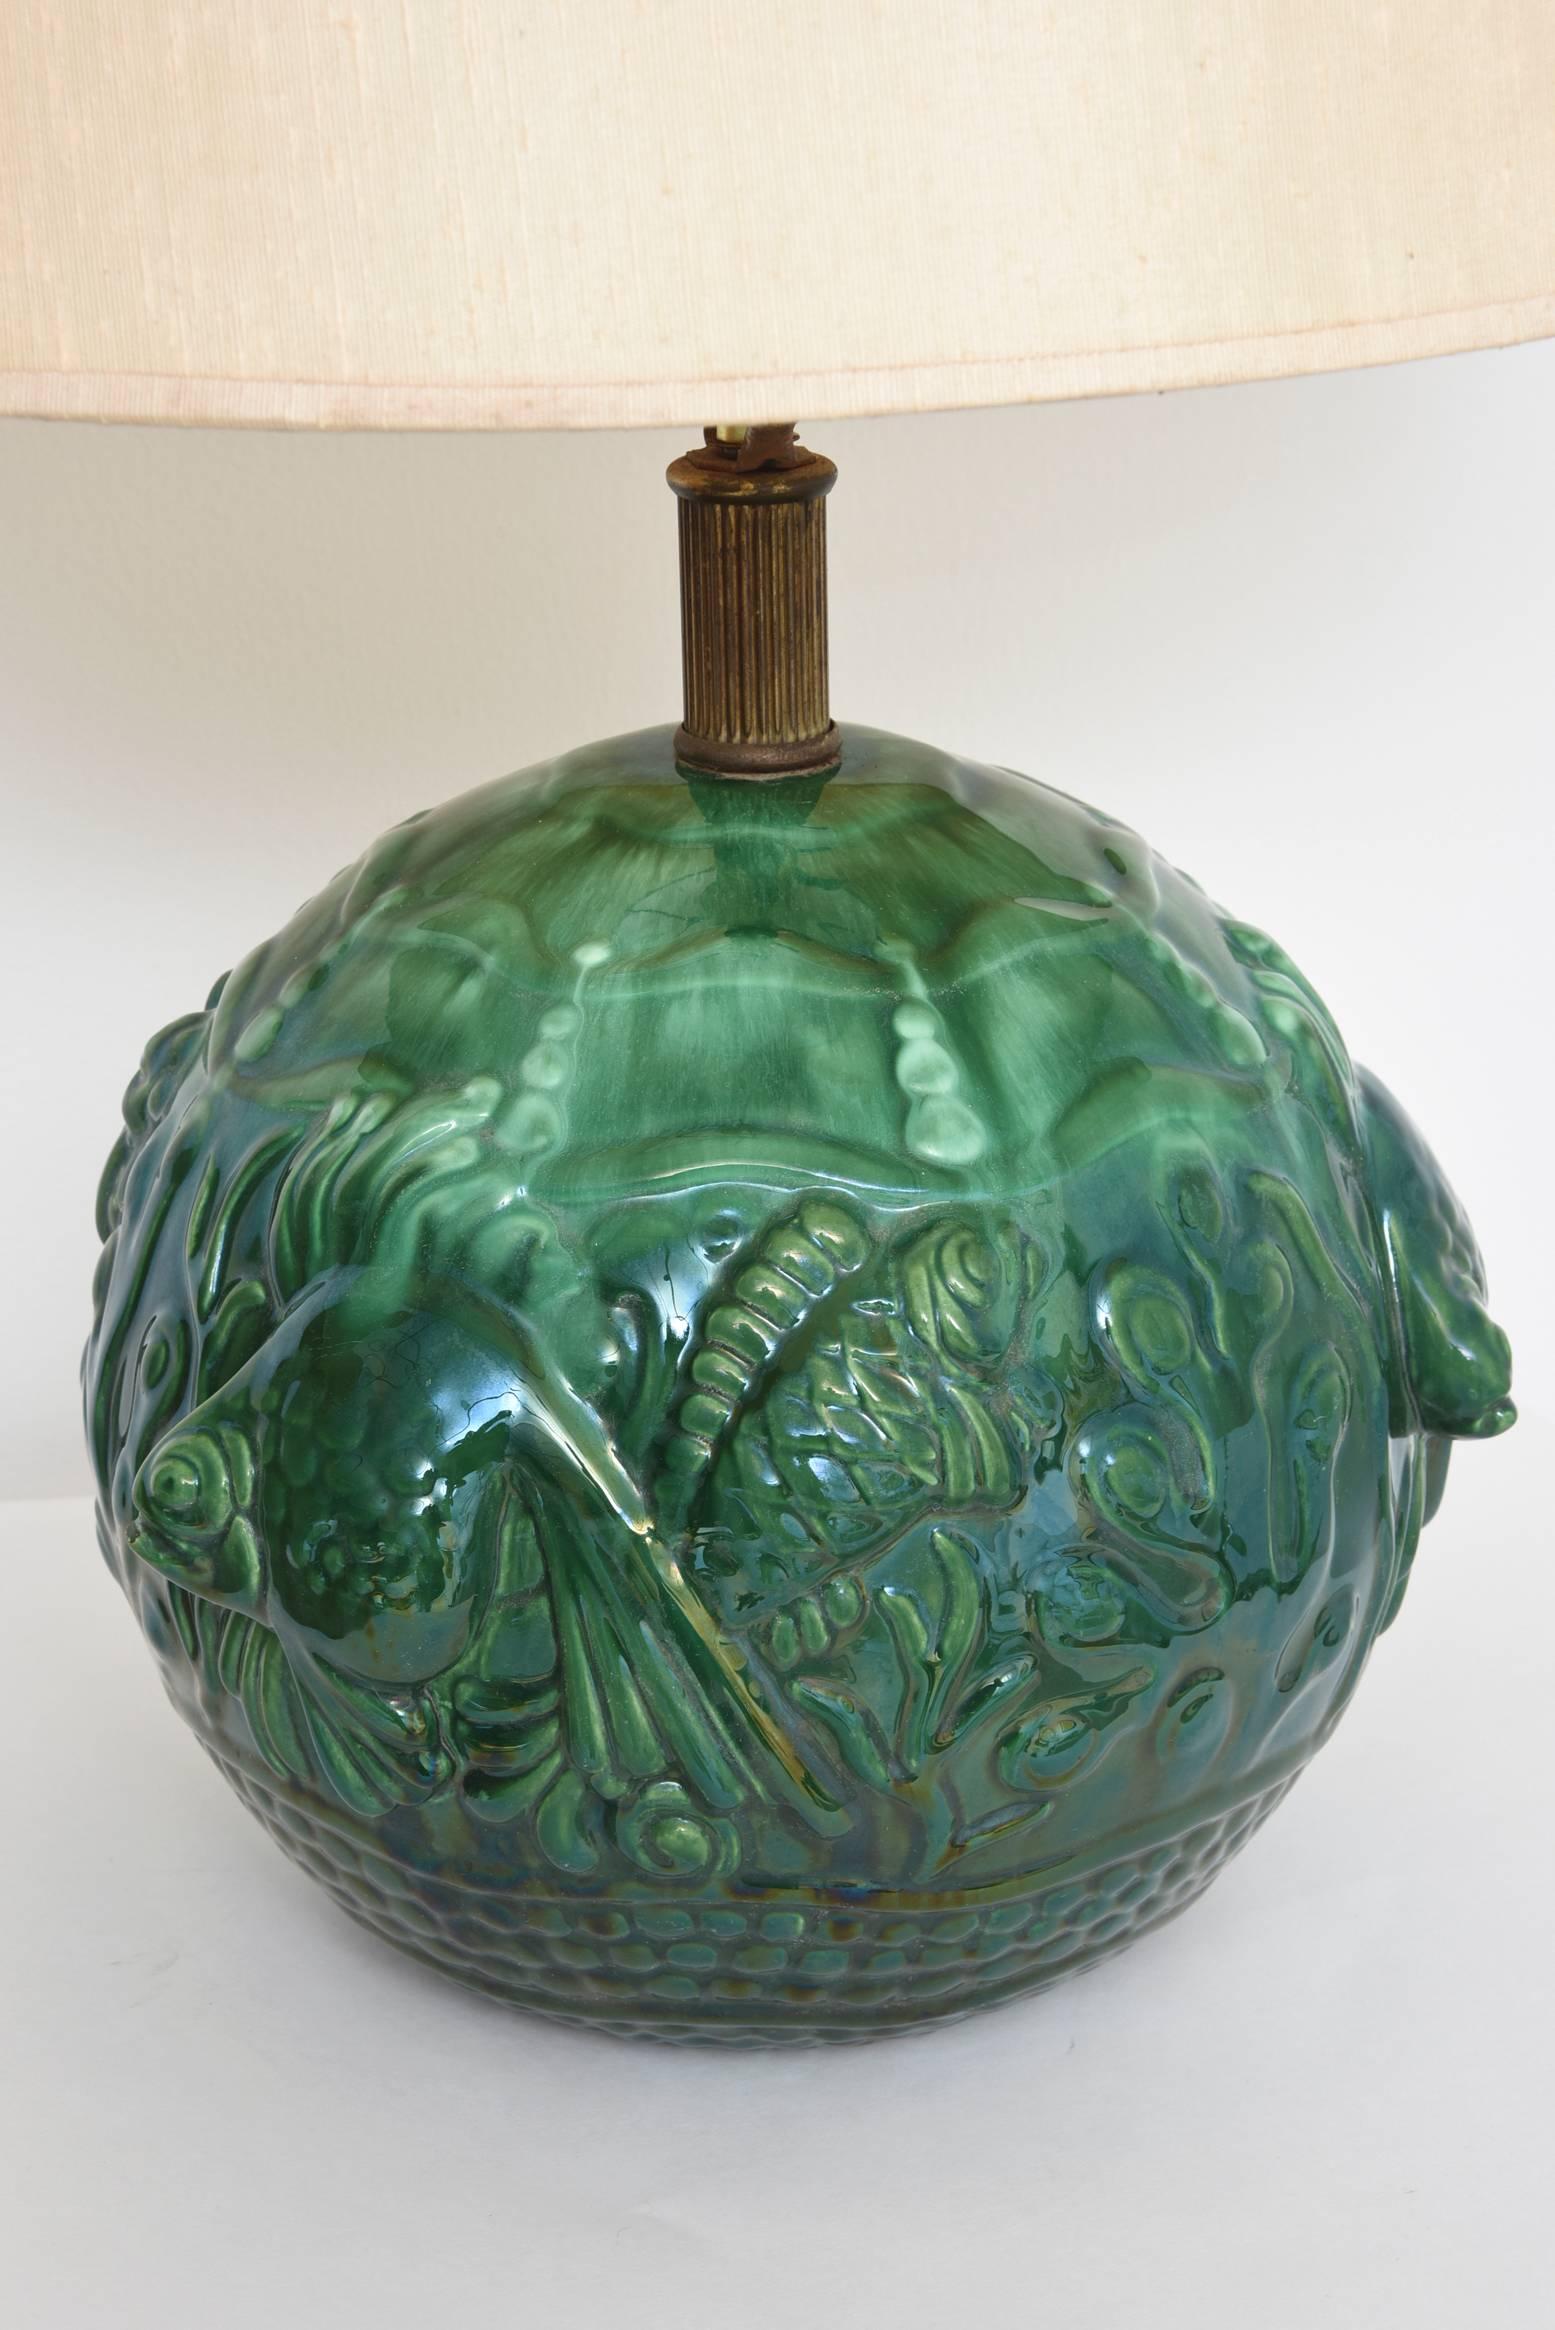 Stunning French Art Deco green ceramic lamp featuring fish playing in coral on a sandy bottom under the waves.

Shade not included. The height below is to the top of the shade. The ceramic section only is approximately 12